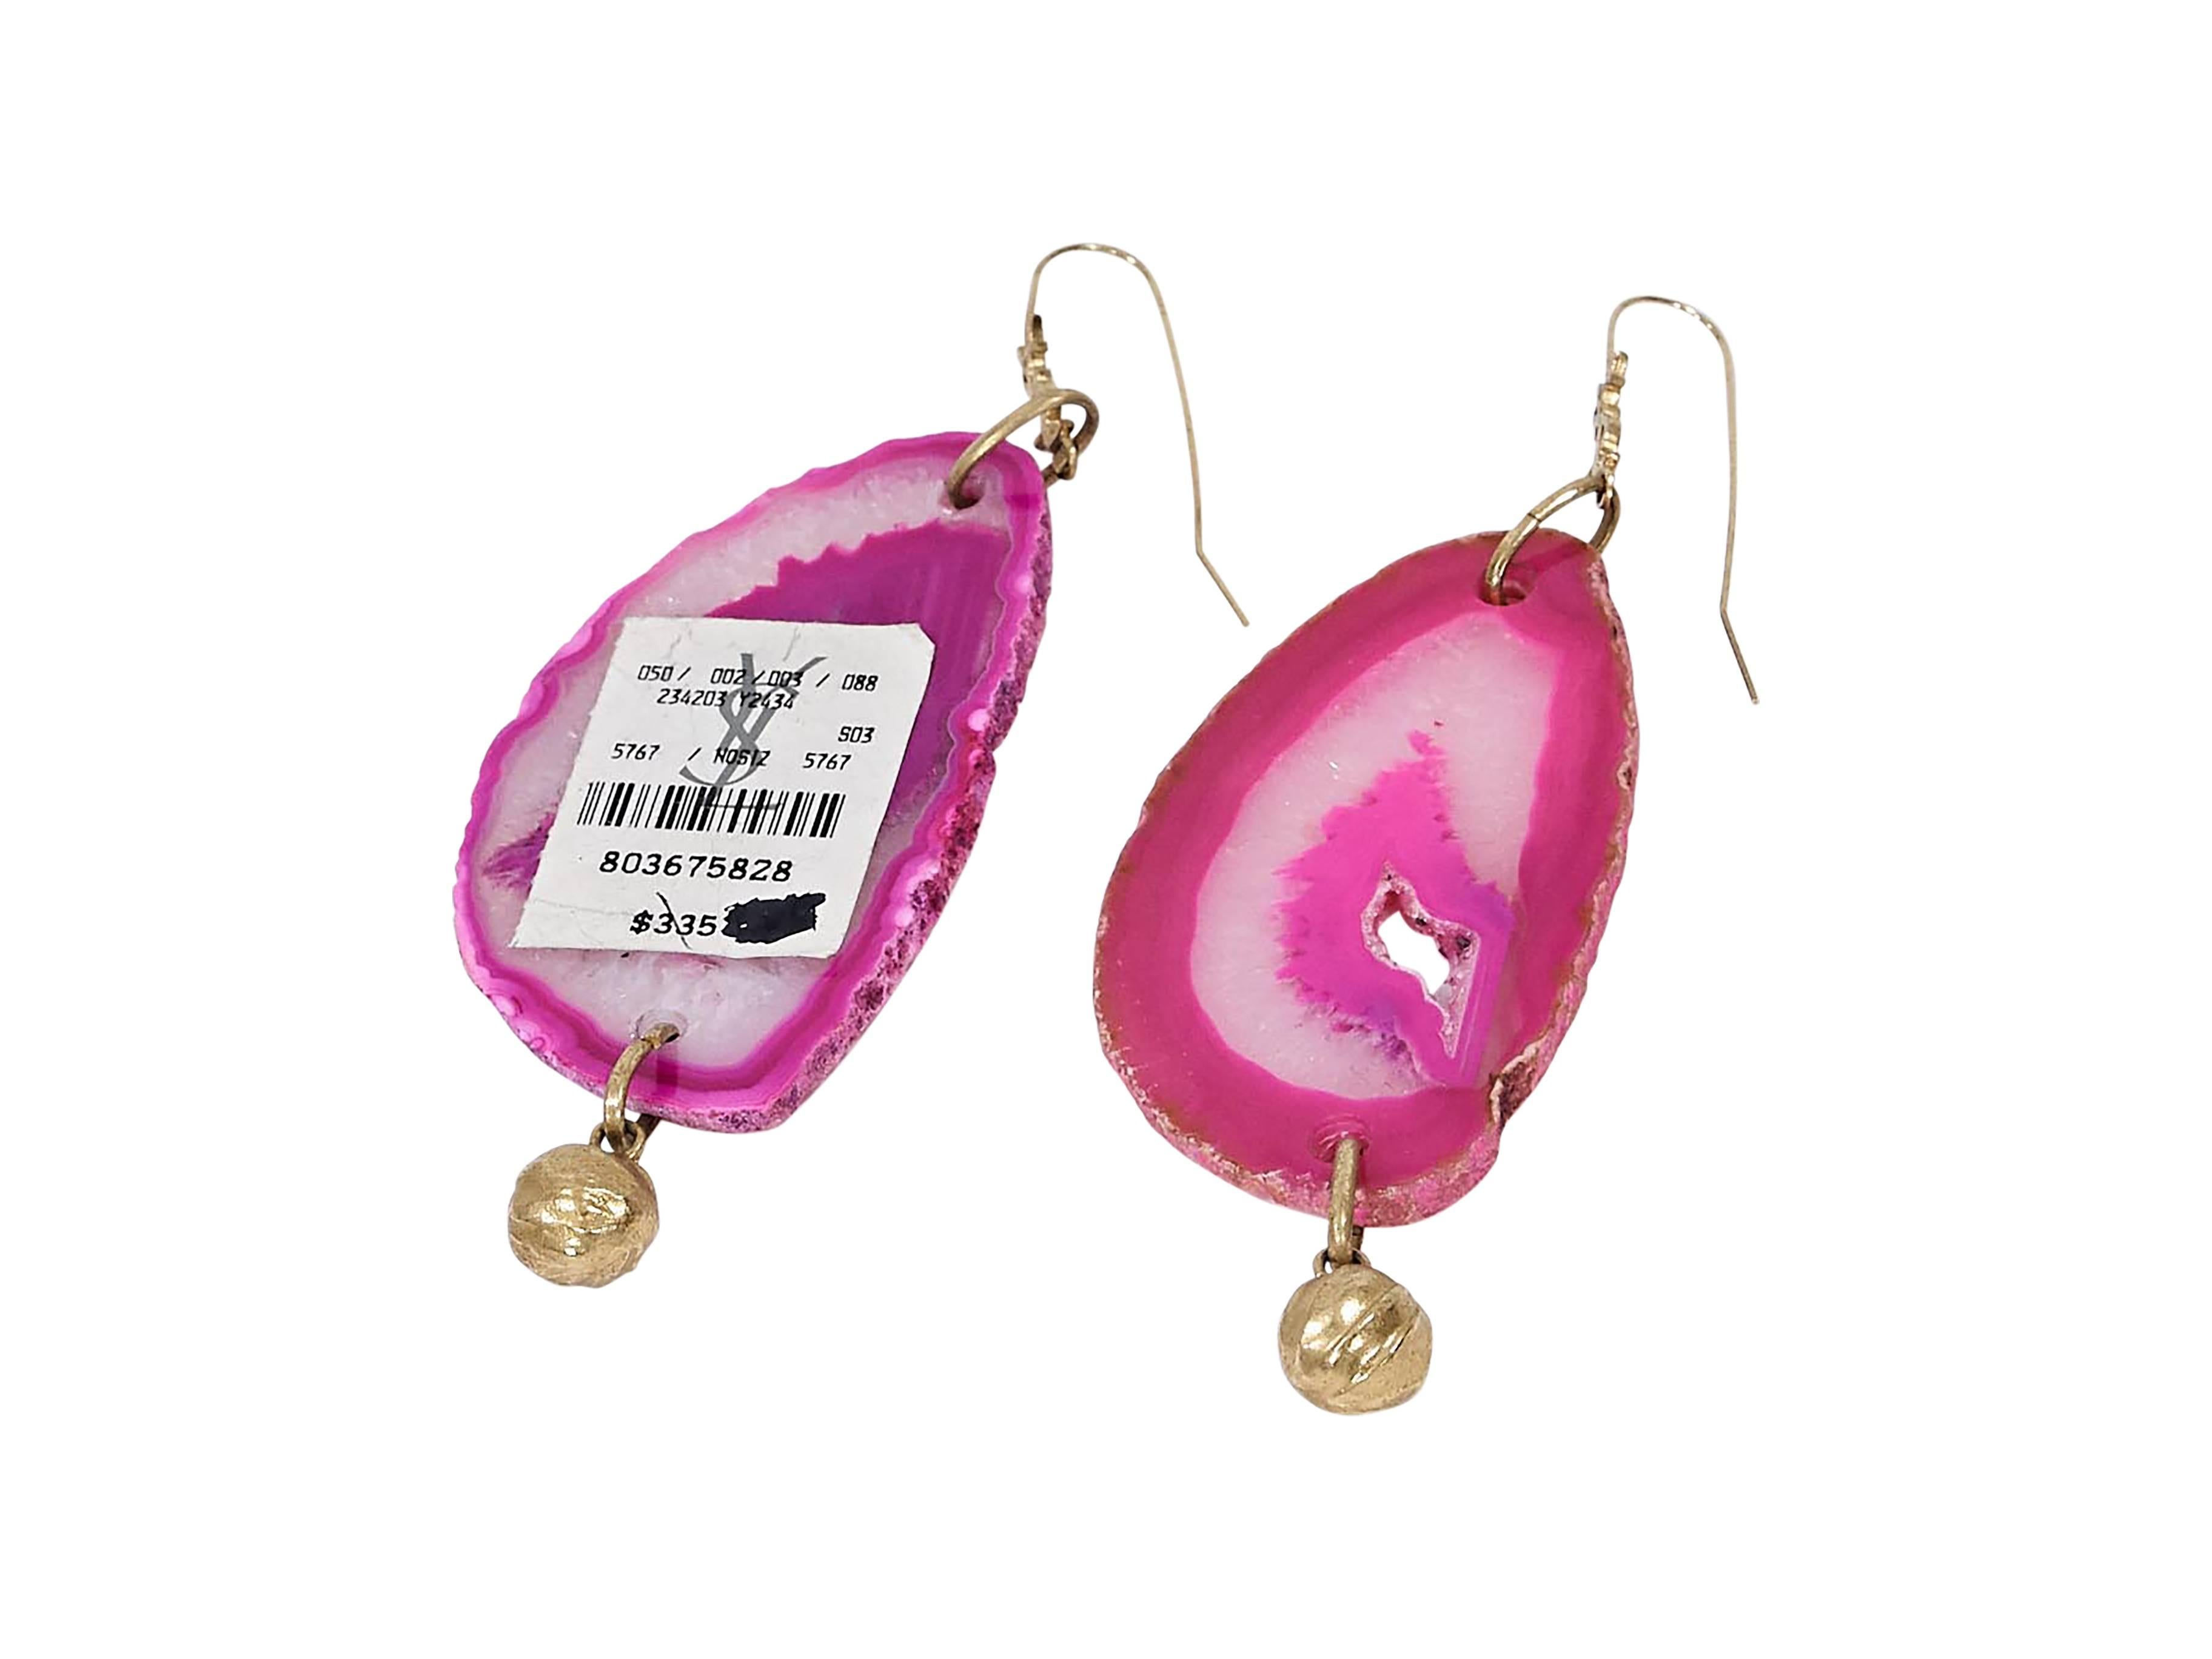 Product details:  Pink agate drop earrings by Yves Saint Laurent.  Accented with a ball charm.  Hook backings.  Goldtone hardware.  4.5